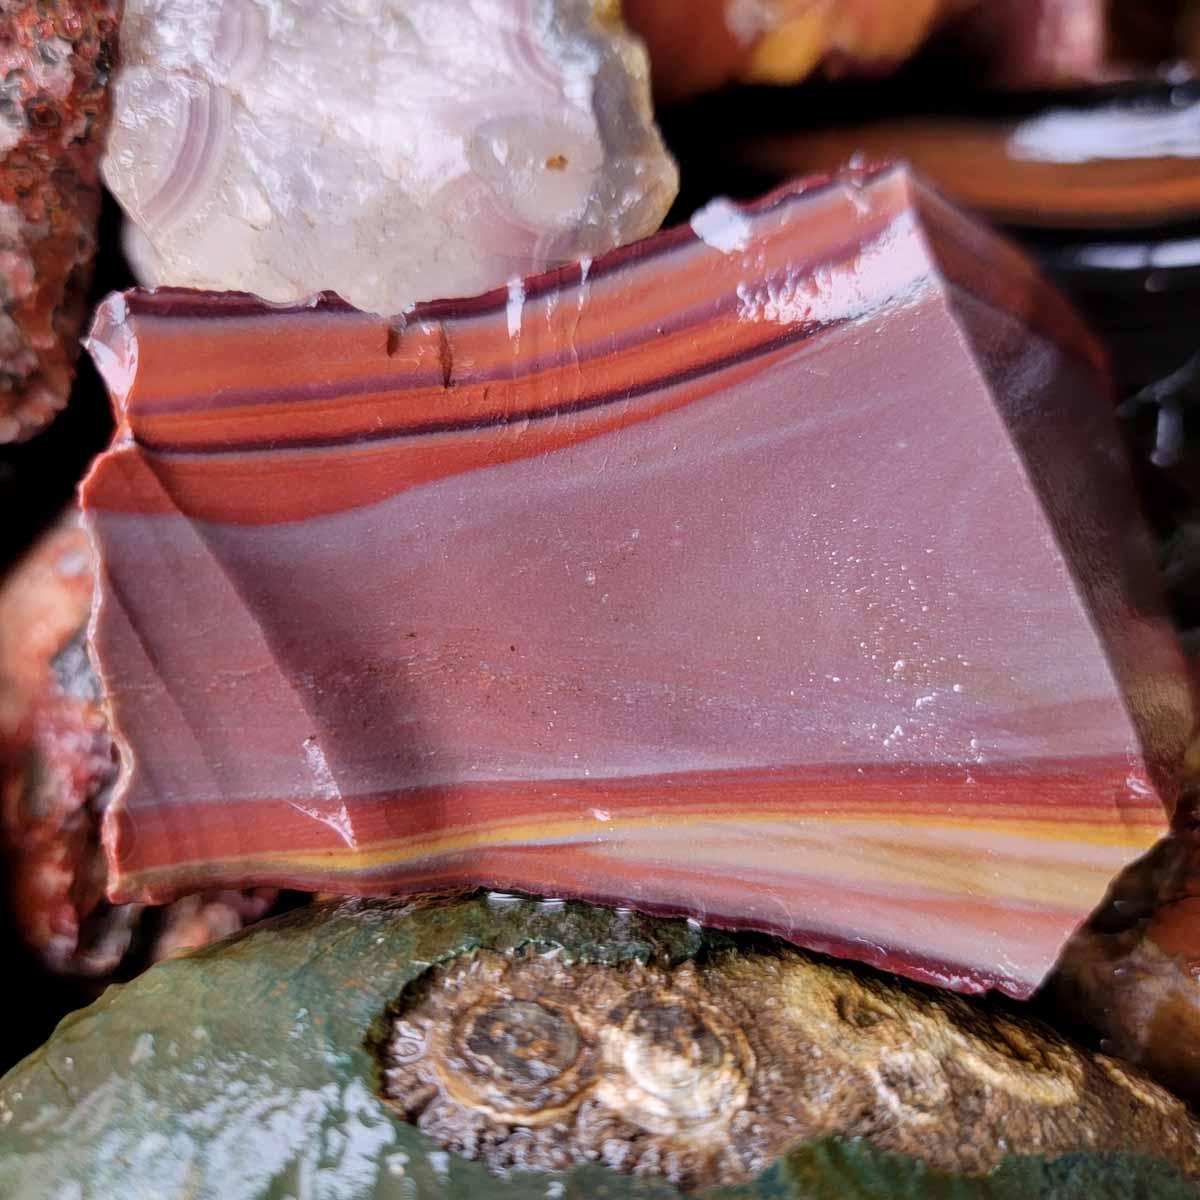 Discount Mix Lapidary Cutting Rough Flatrate! Agate and Jasper! - Lapidary Central